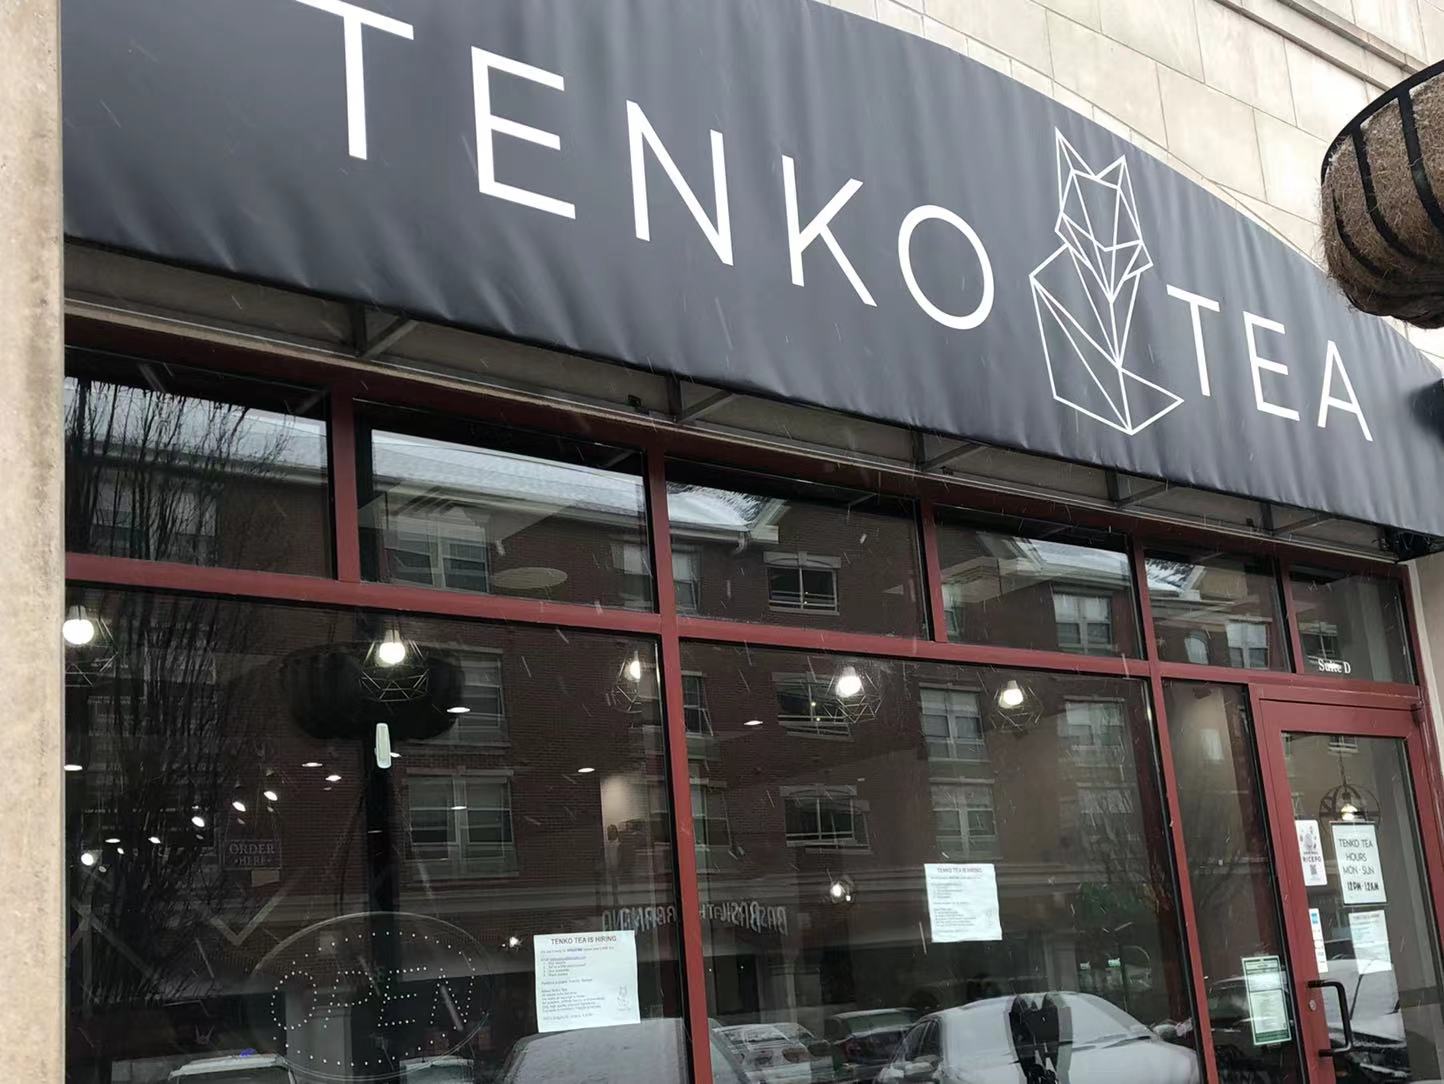 The exterior of Tenko Tea has a black awning with the boba shop's name in a thin font with a fox. Photo by Xiaohui Zhang.